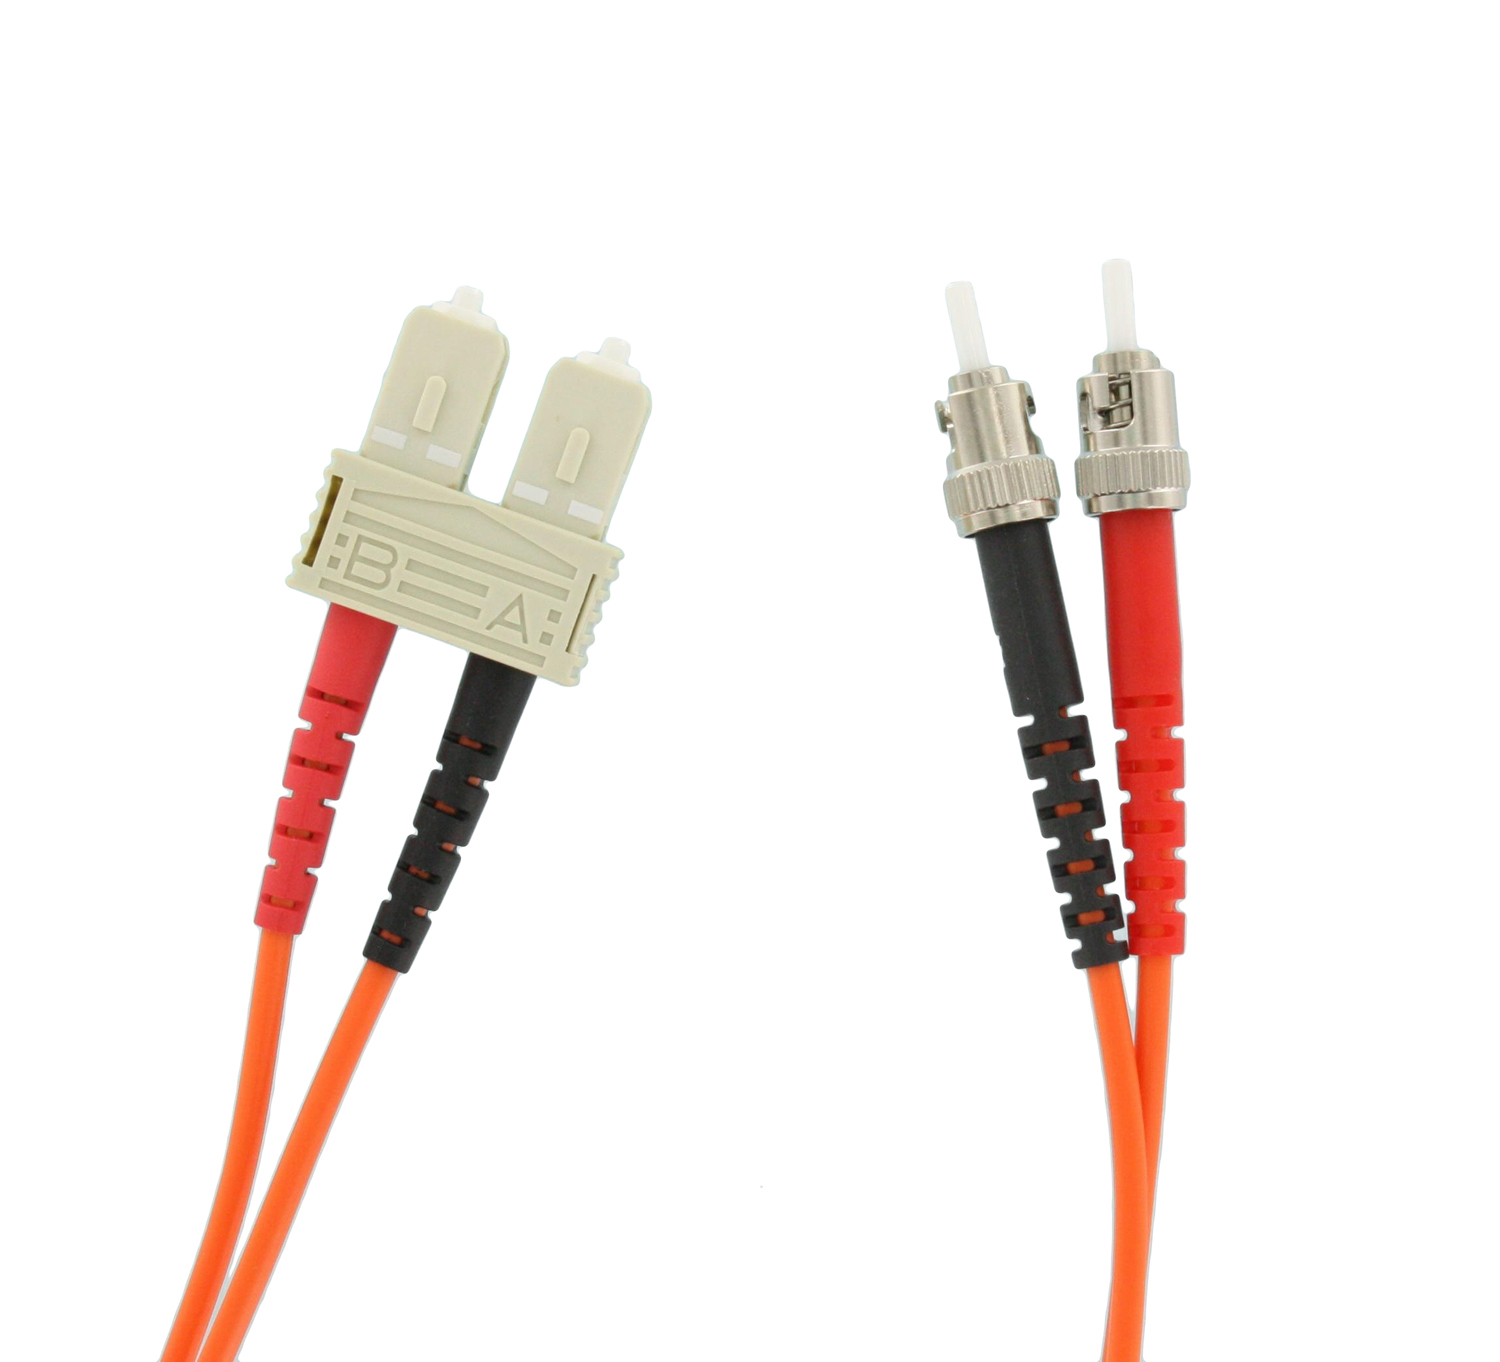 Fiber Patch Cord: 62.5/125 UM Multimode (OM1) Duplex Riser-rated (3 MM Zipcord). SC To ST,5 Meters Length (Polarity Is A-b). Cable Color - Orange